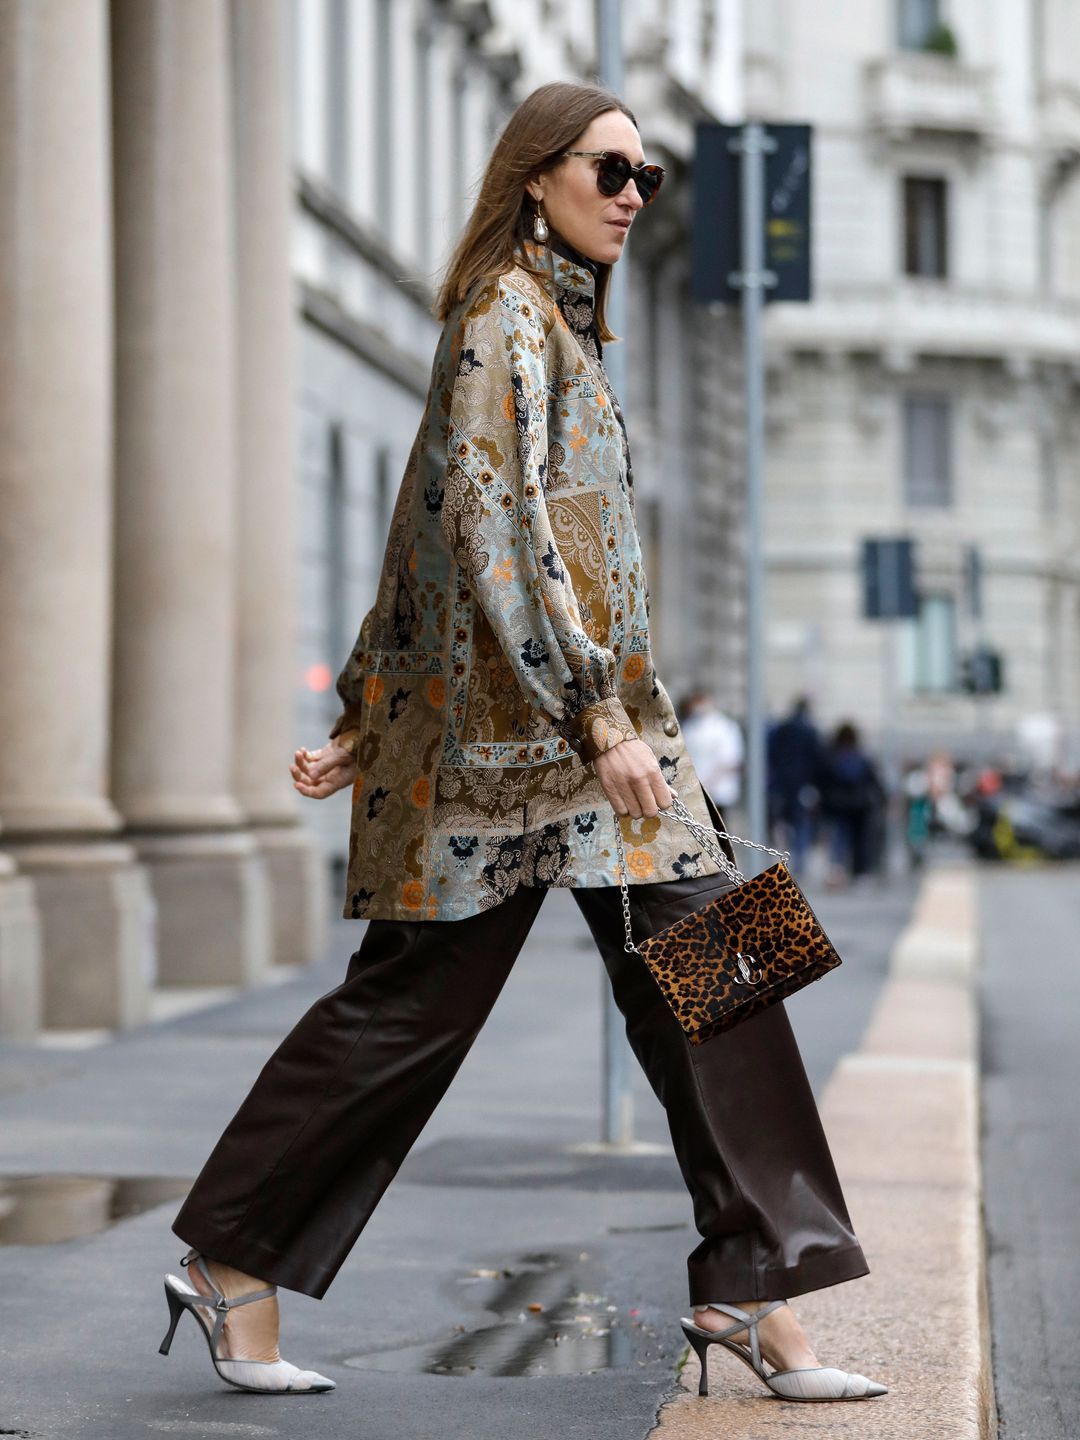 Annette Weber teams a floral tunic with a leopard print clutch 